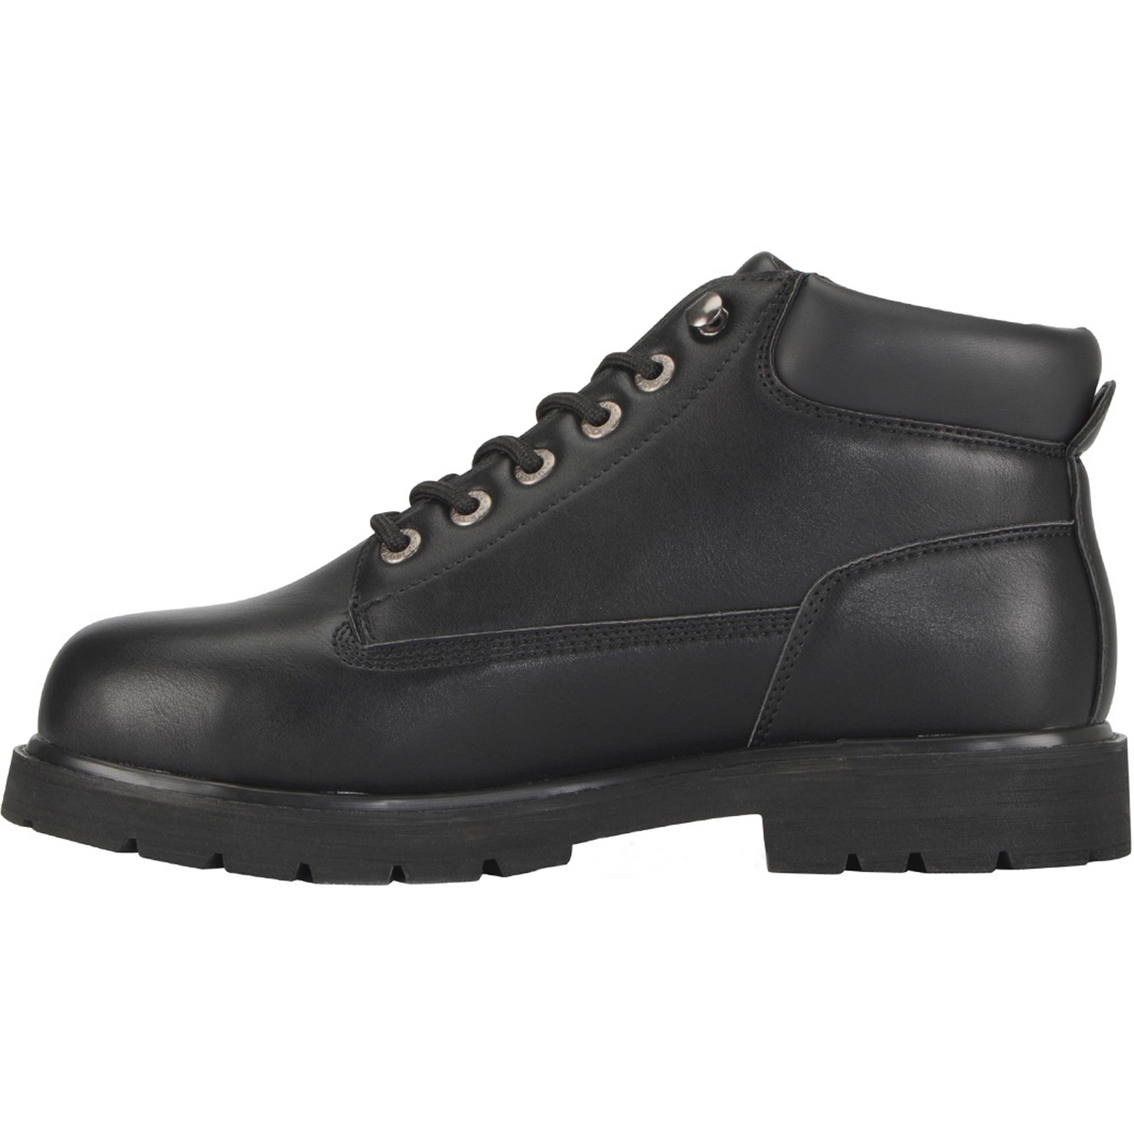 Lugz Men's Drifter Mid ST Boots - Image 2 of 4